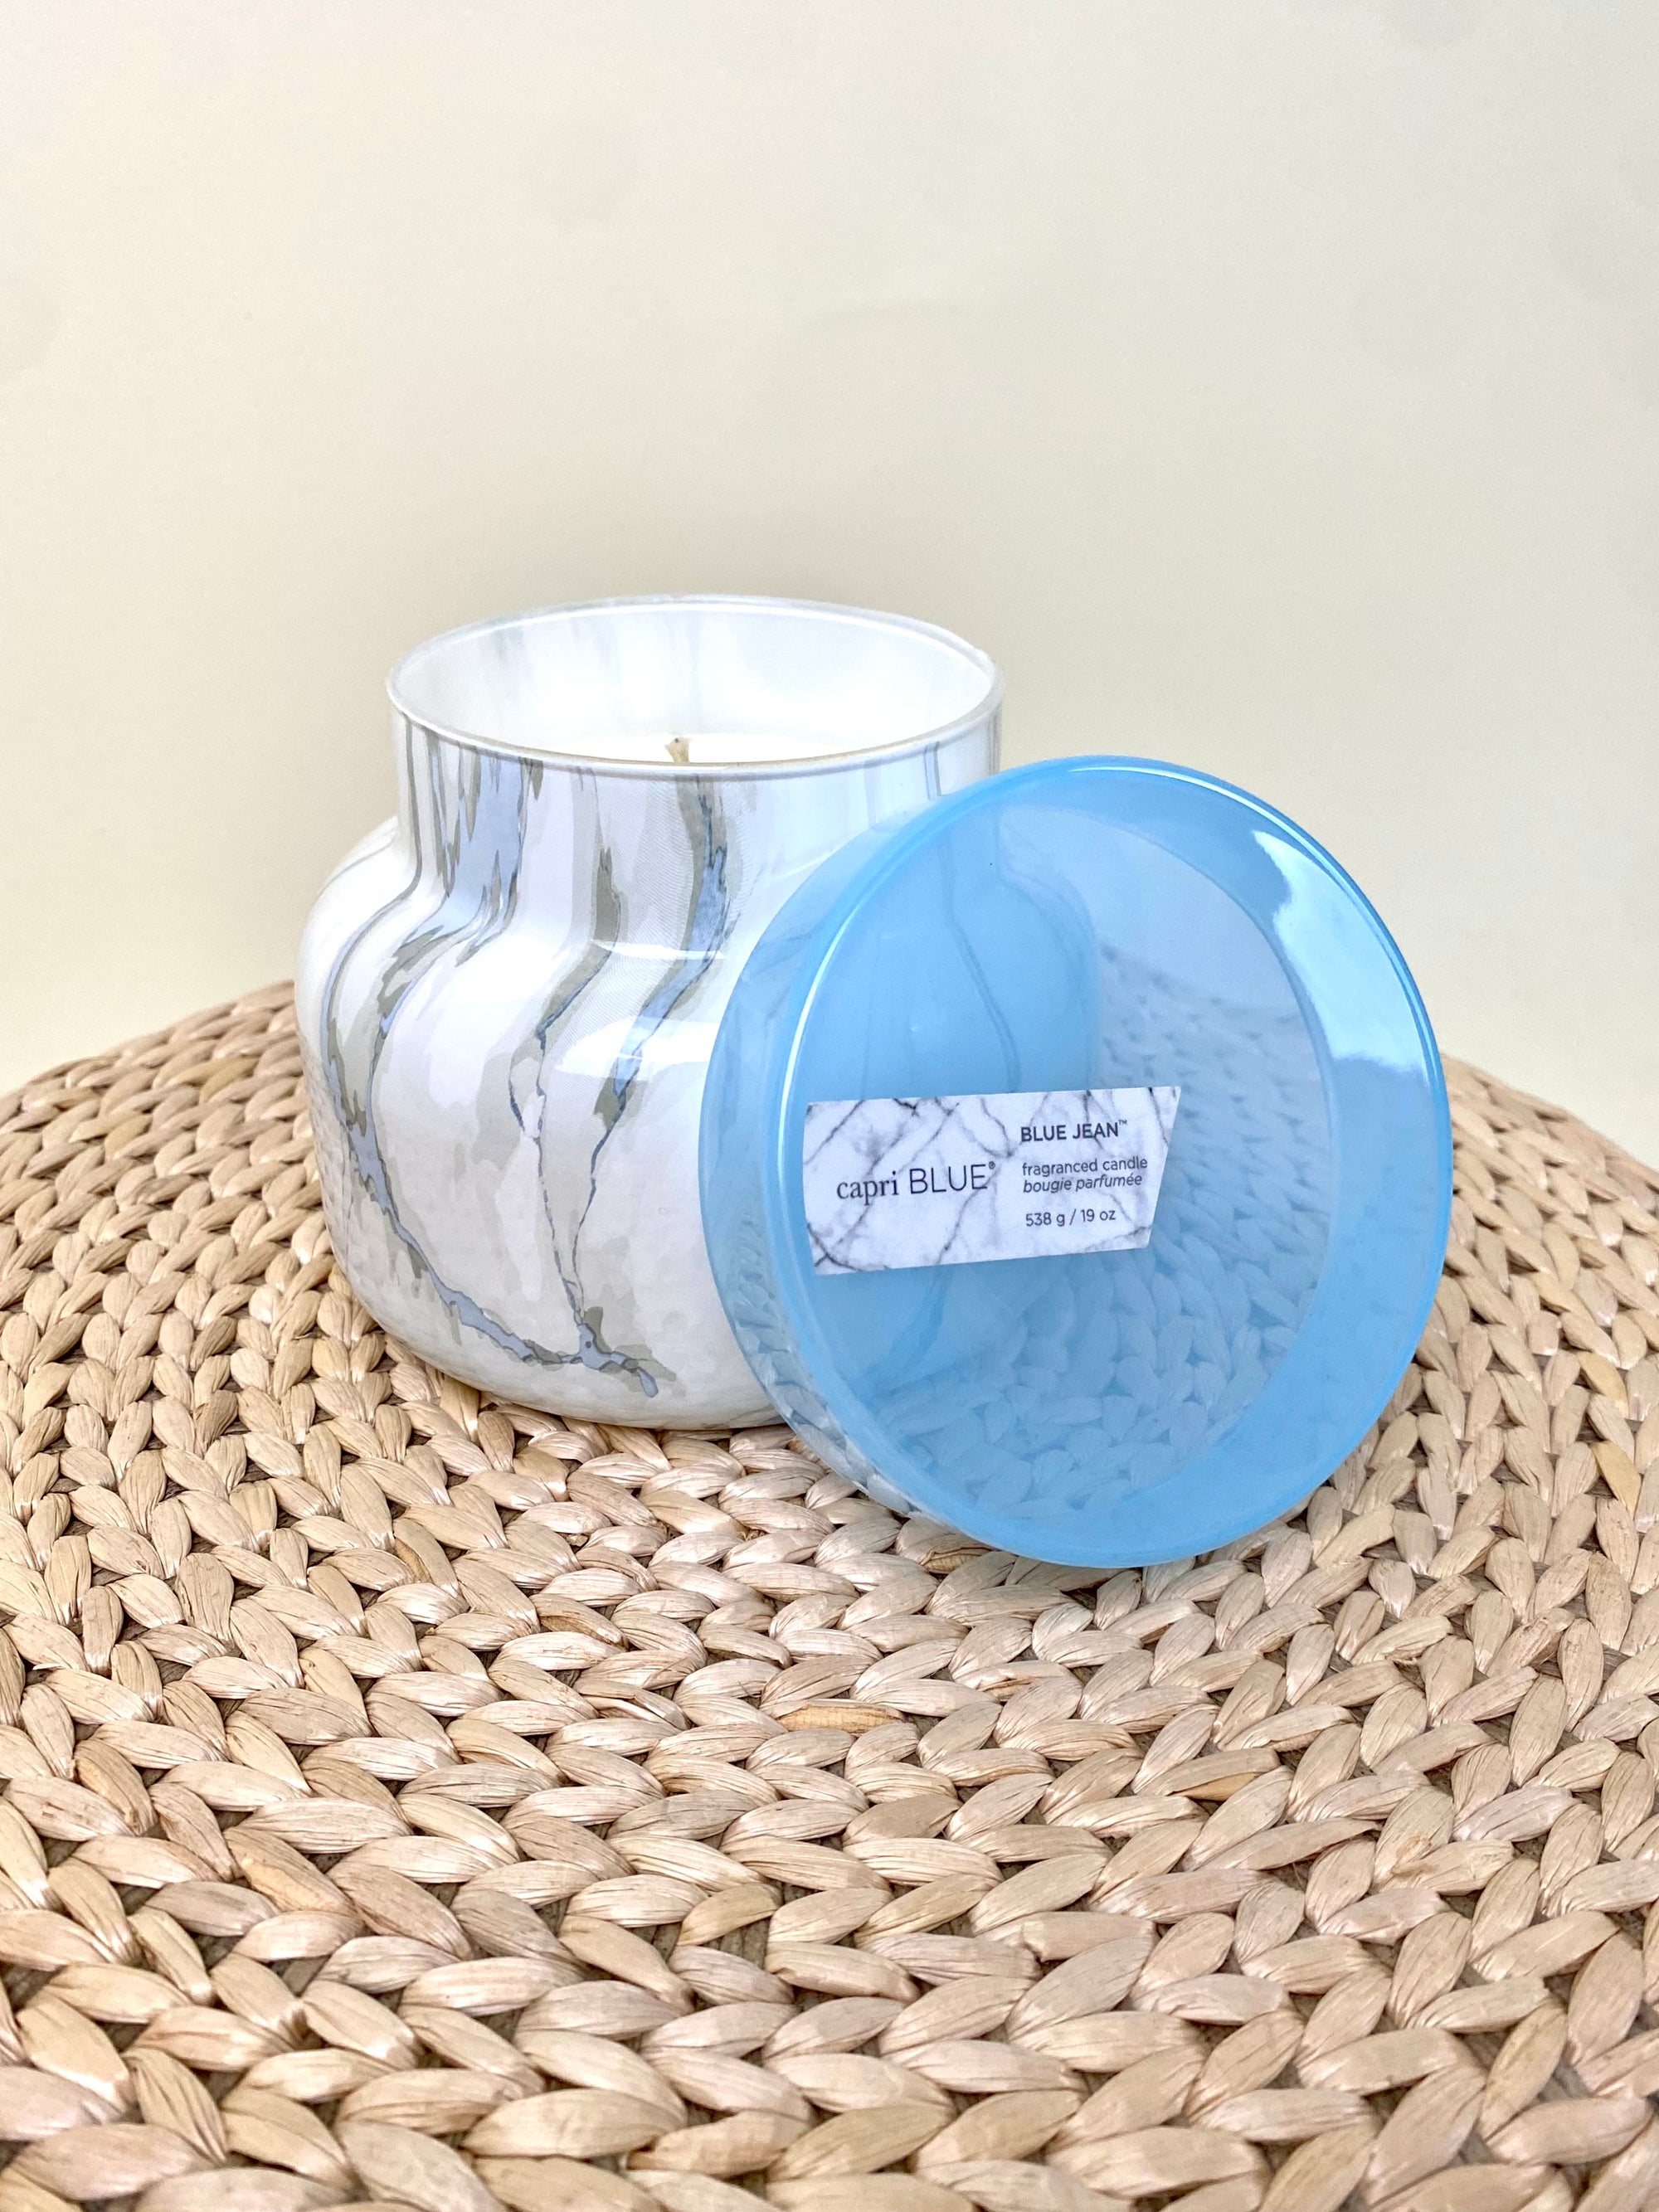 Capri Blue blue jean scent 19oz candle mod marble - Trendy Candles and Scents at Lush Fashion Lounge Boutique in Oklahoma City